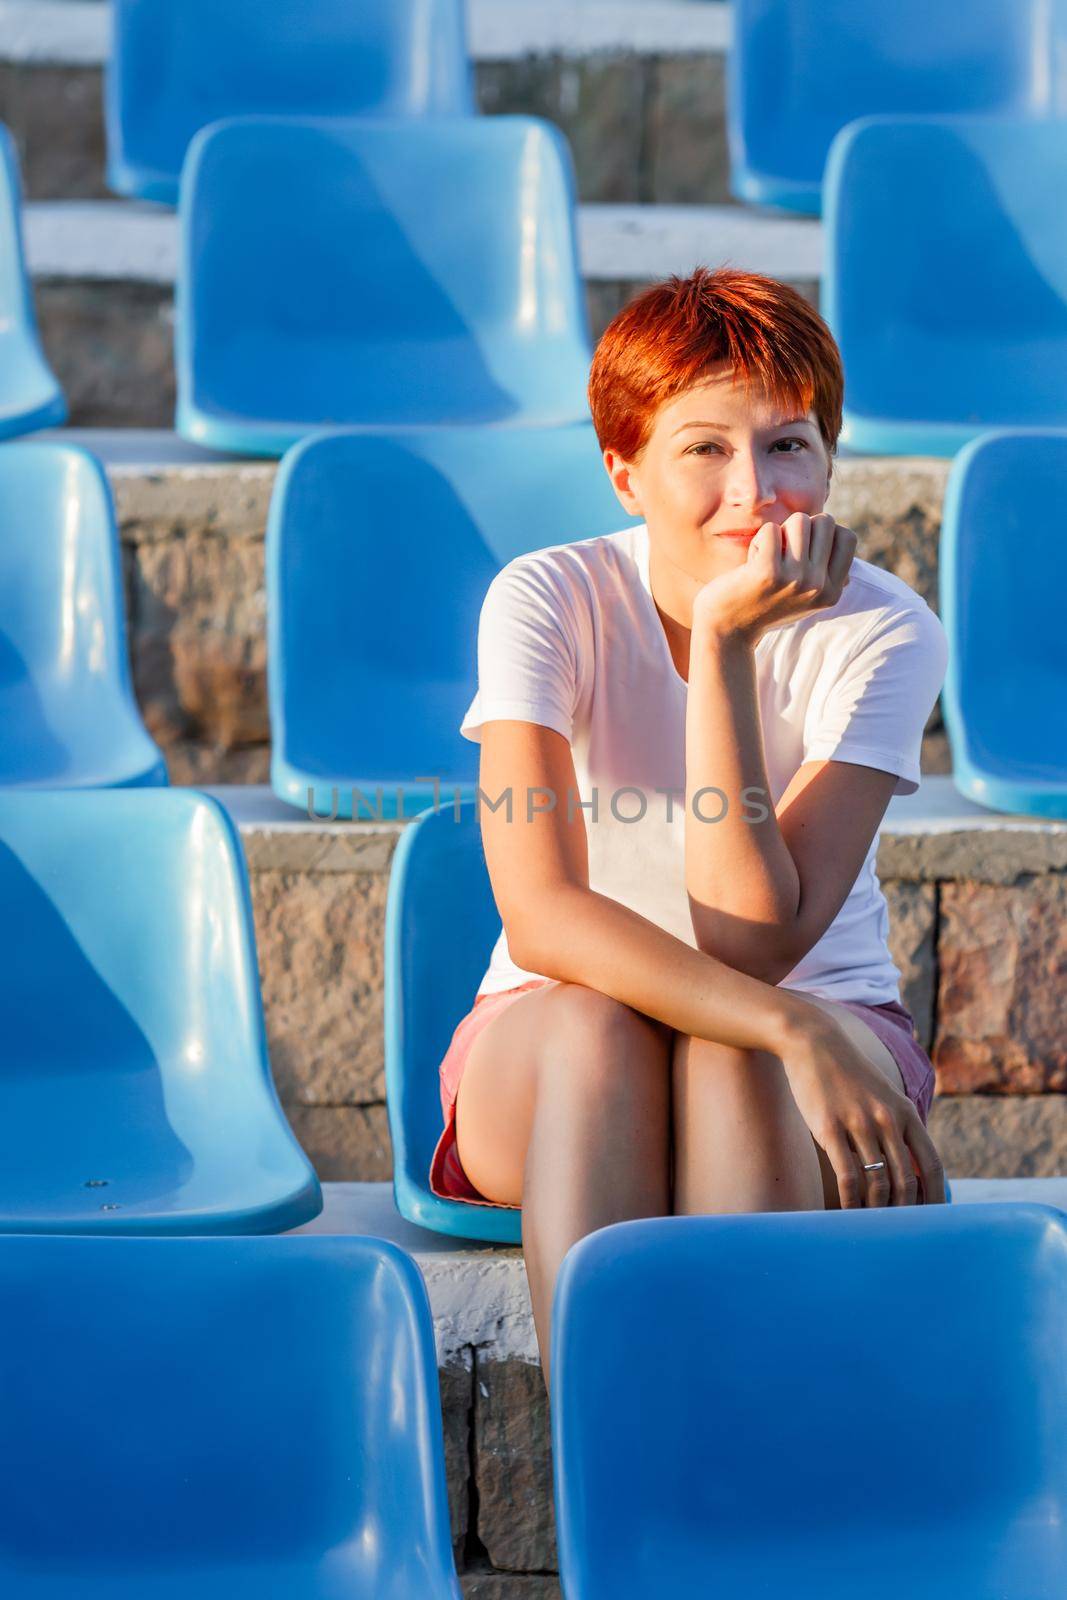 Young woman with short red hair sits relaxed in deserted open air audience. Summer vibes. Sport stadium with plastic blue seats. by aksenovko